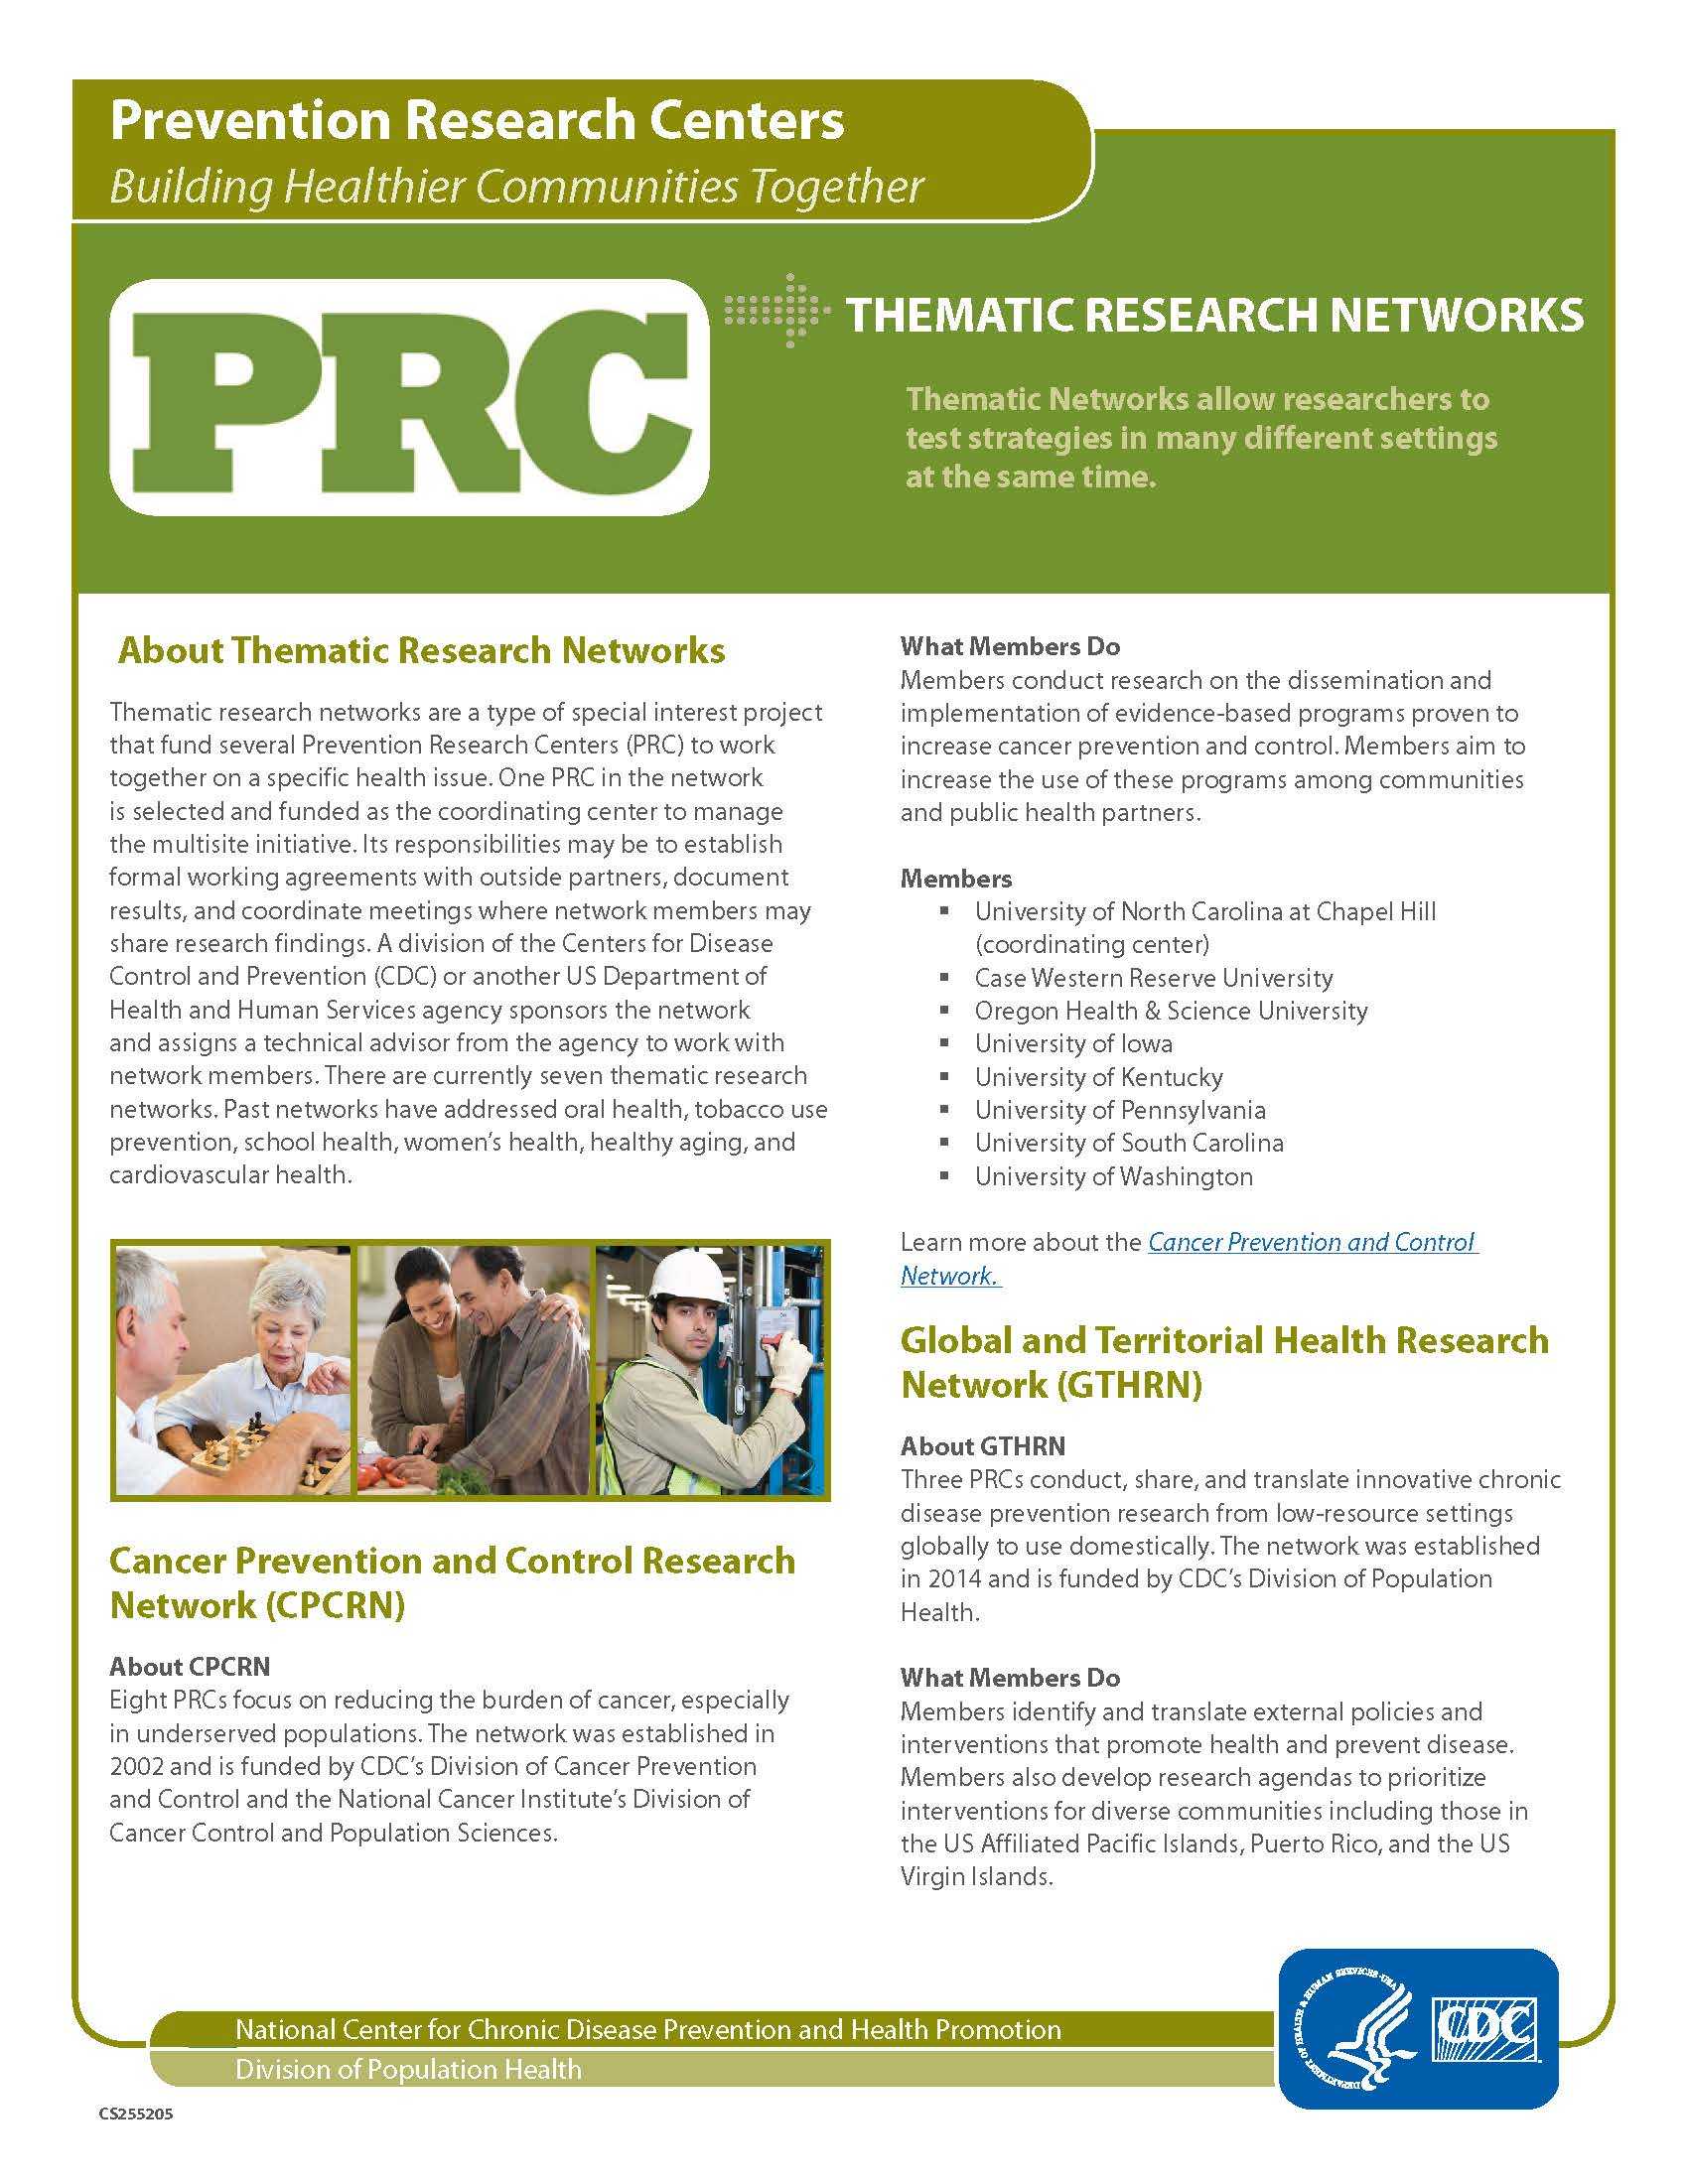 PRC Thematic Research Networks Fact Sheet